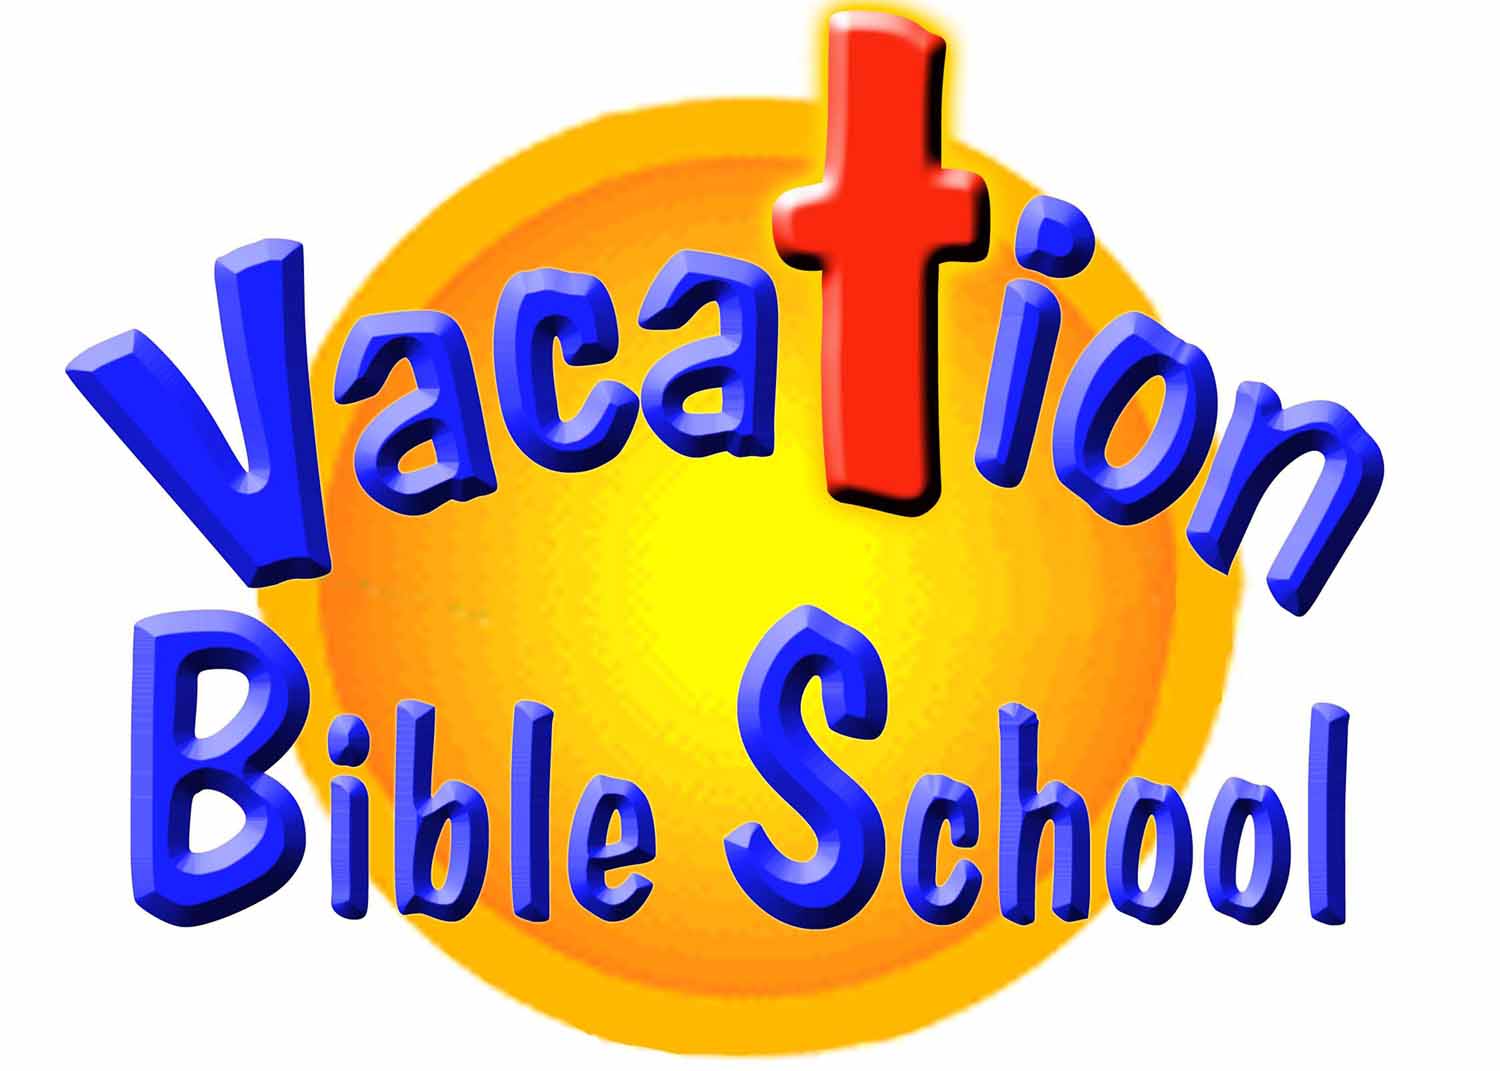 free-church-vacation-cliparts-download-free-church-vacation-cliparts